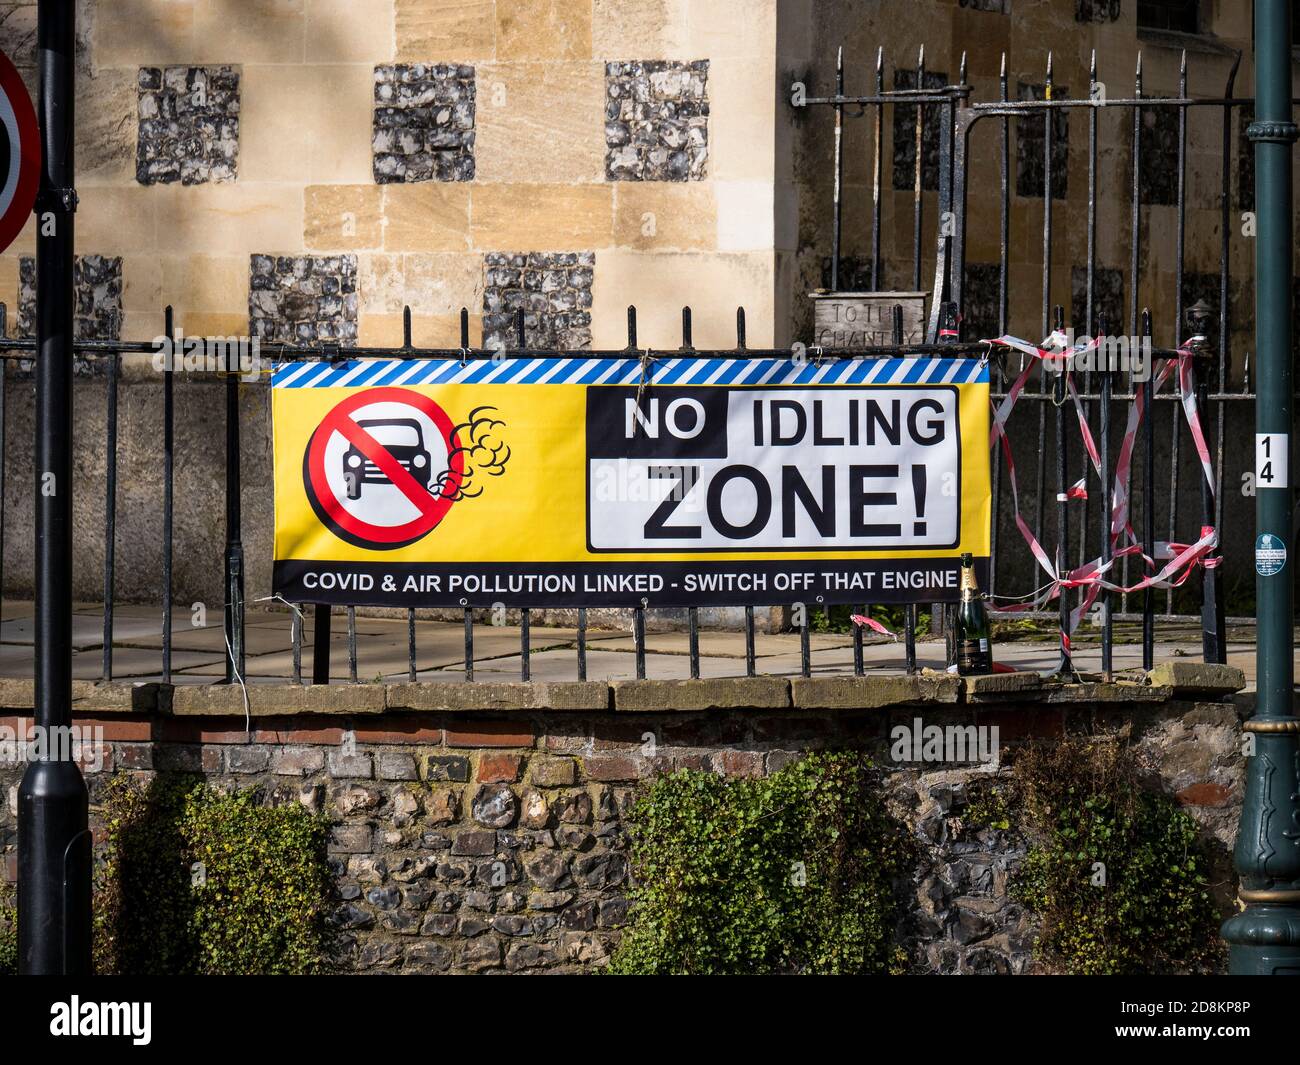 Schild für No Idling Zone, Making Link with Covid 19, Henley-on-Thames, Oxfordshire, England, UK, GB. Stockfoto